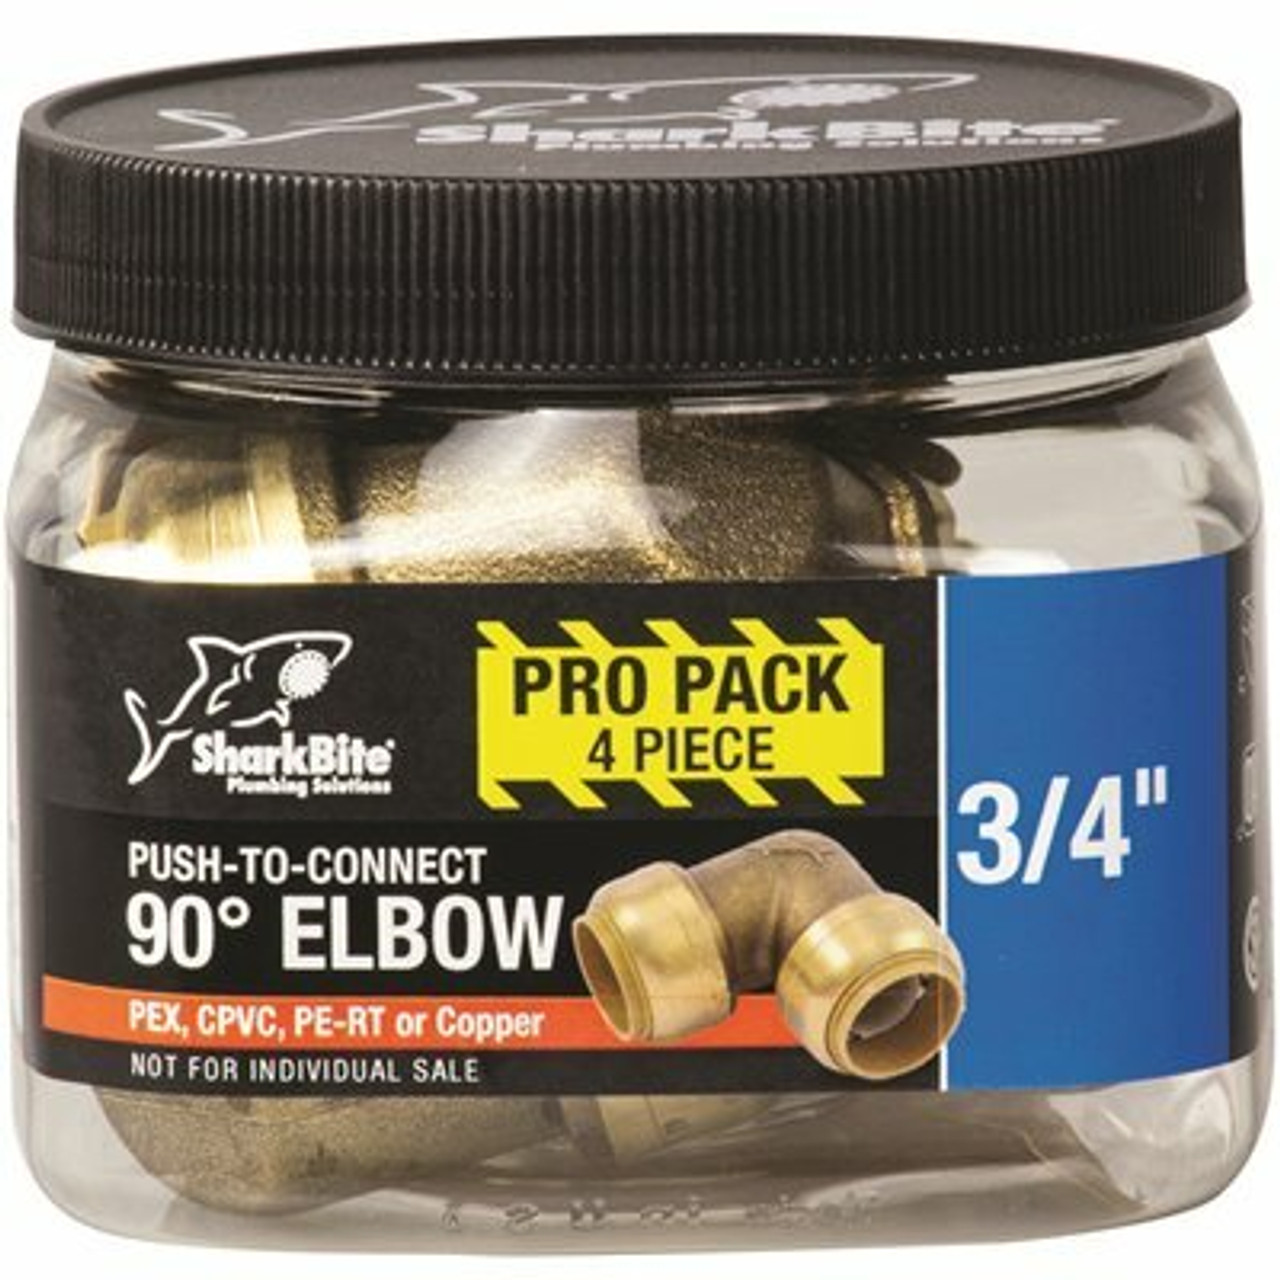 Sharkbite 3/4 In. Push-To-Connect Brass 90-Degree Elbow Fitting Pro Pack (4-Pack)